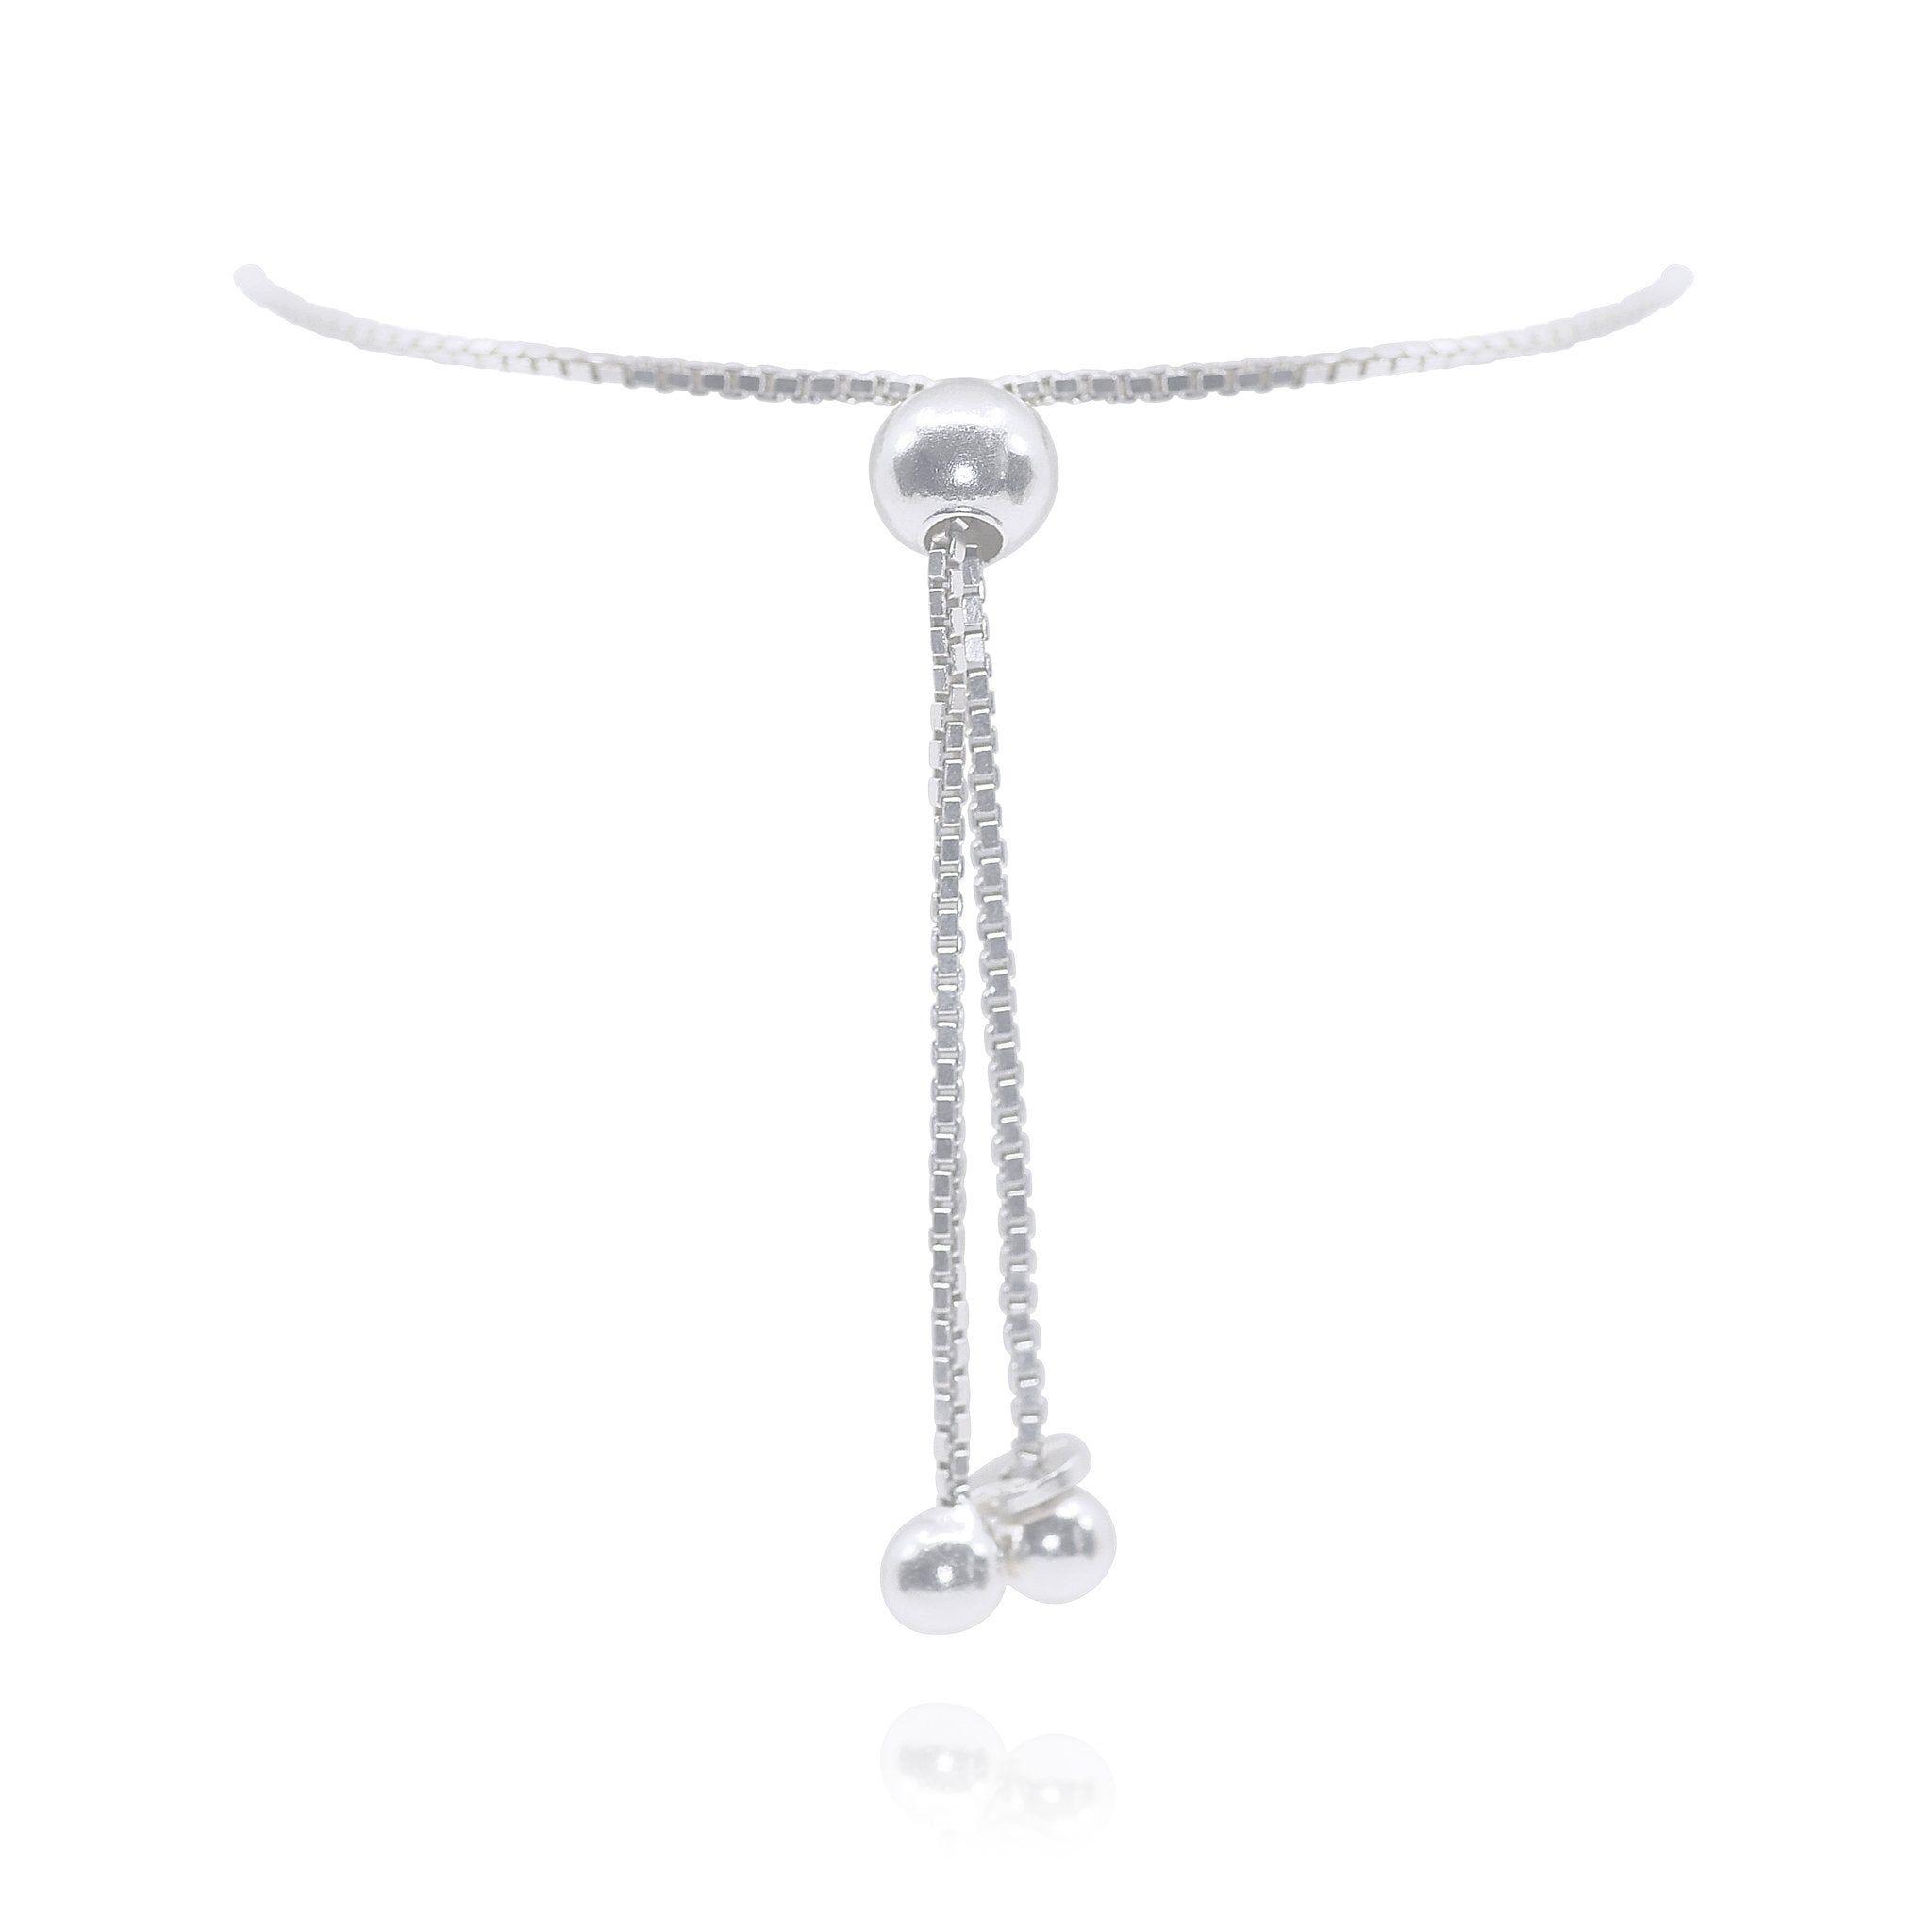 Sterling Silver Ball Slider Bracelet With Engraved Heart - Congratulations  - The Perfect Keepsake Gift